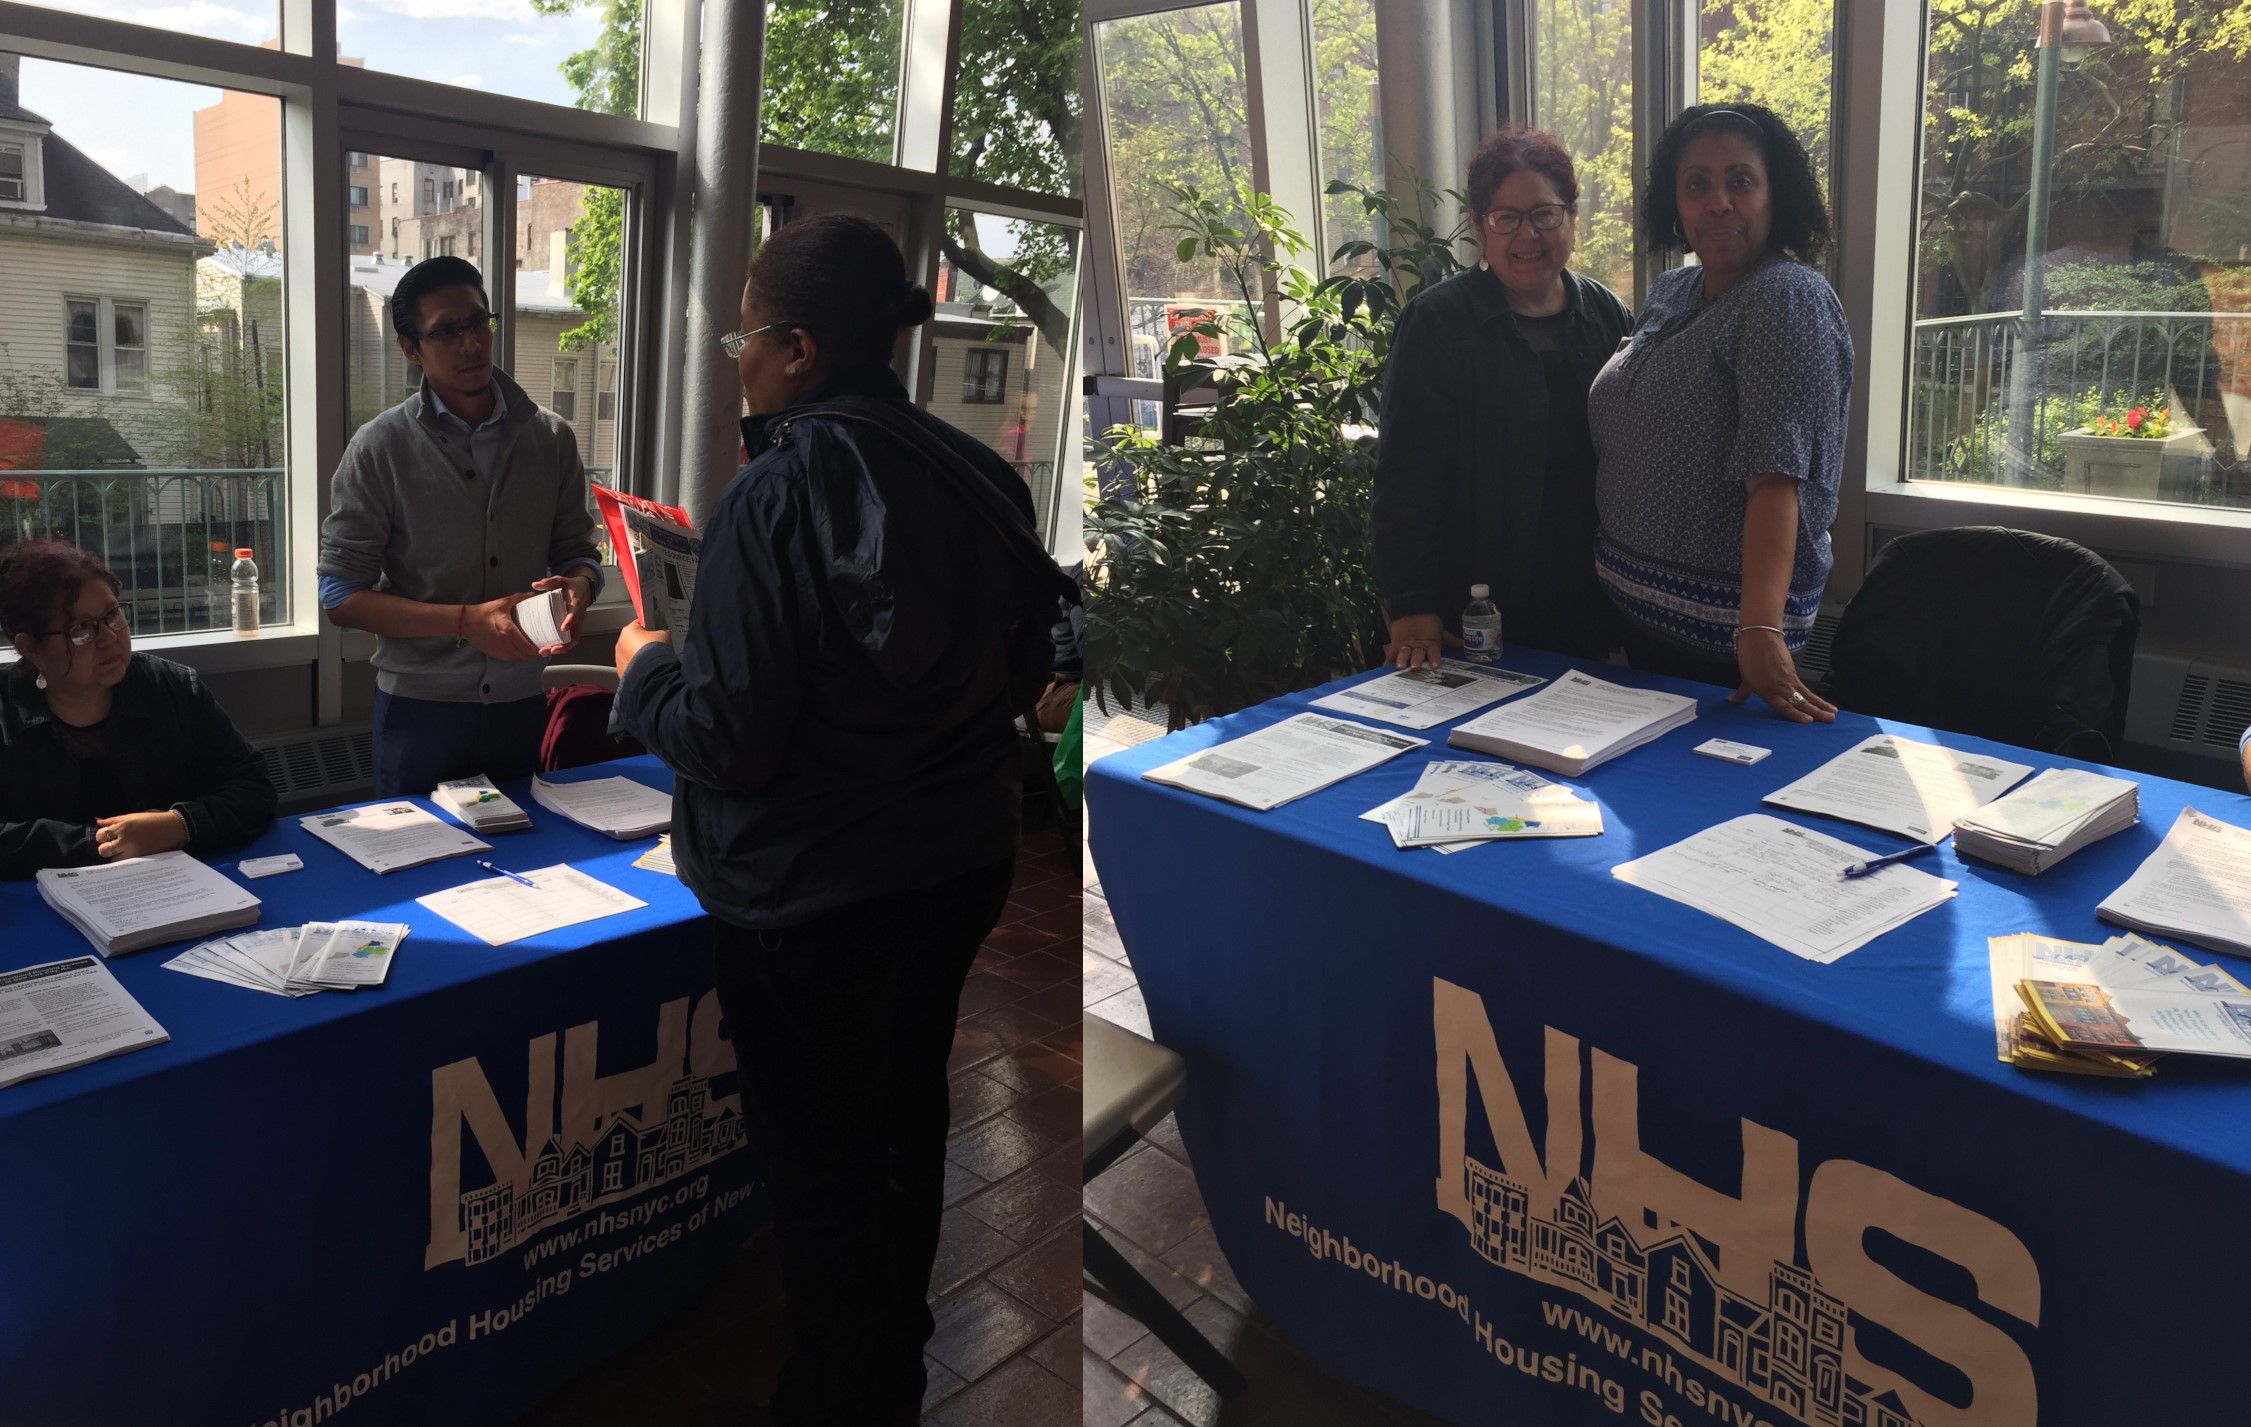 NHS provides access to the homeownership grants and programs offered by NYC. They are skilled homebuyer counselors that can assist moderate-income households to purchase their first home in a challenging NYC real estate environment.